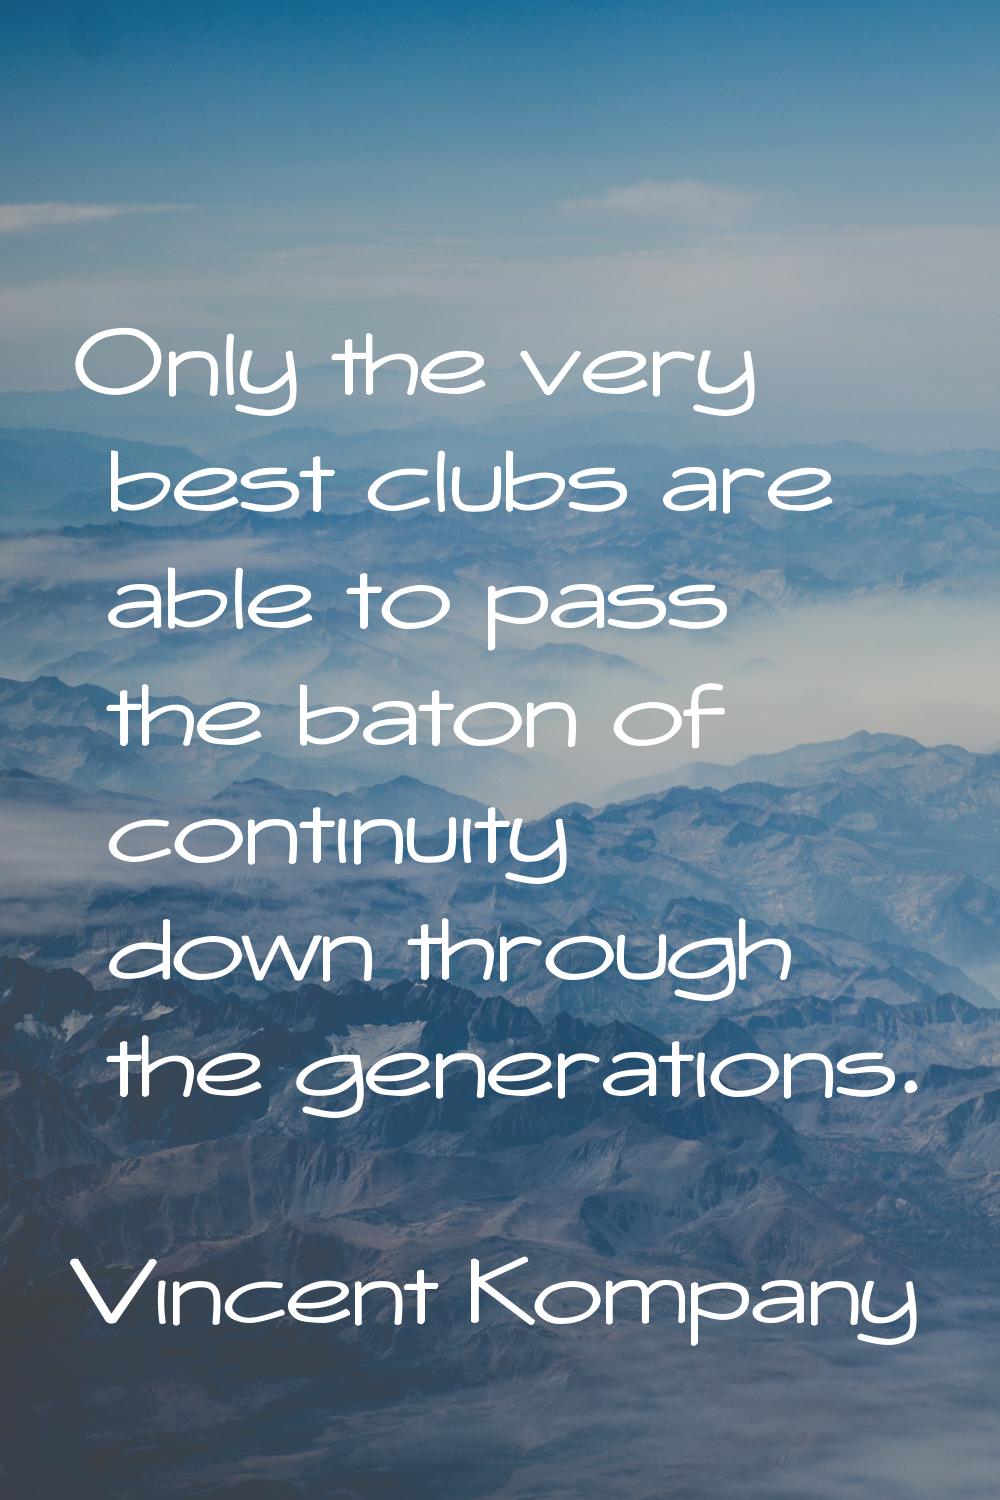 Only the very best clubs are able to pass the baton of continuity down through the generations.